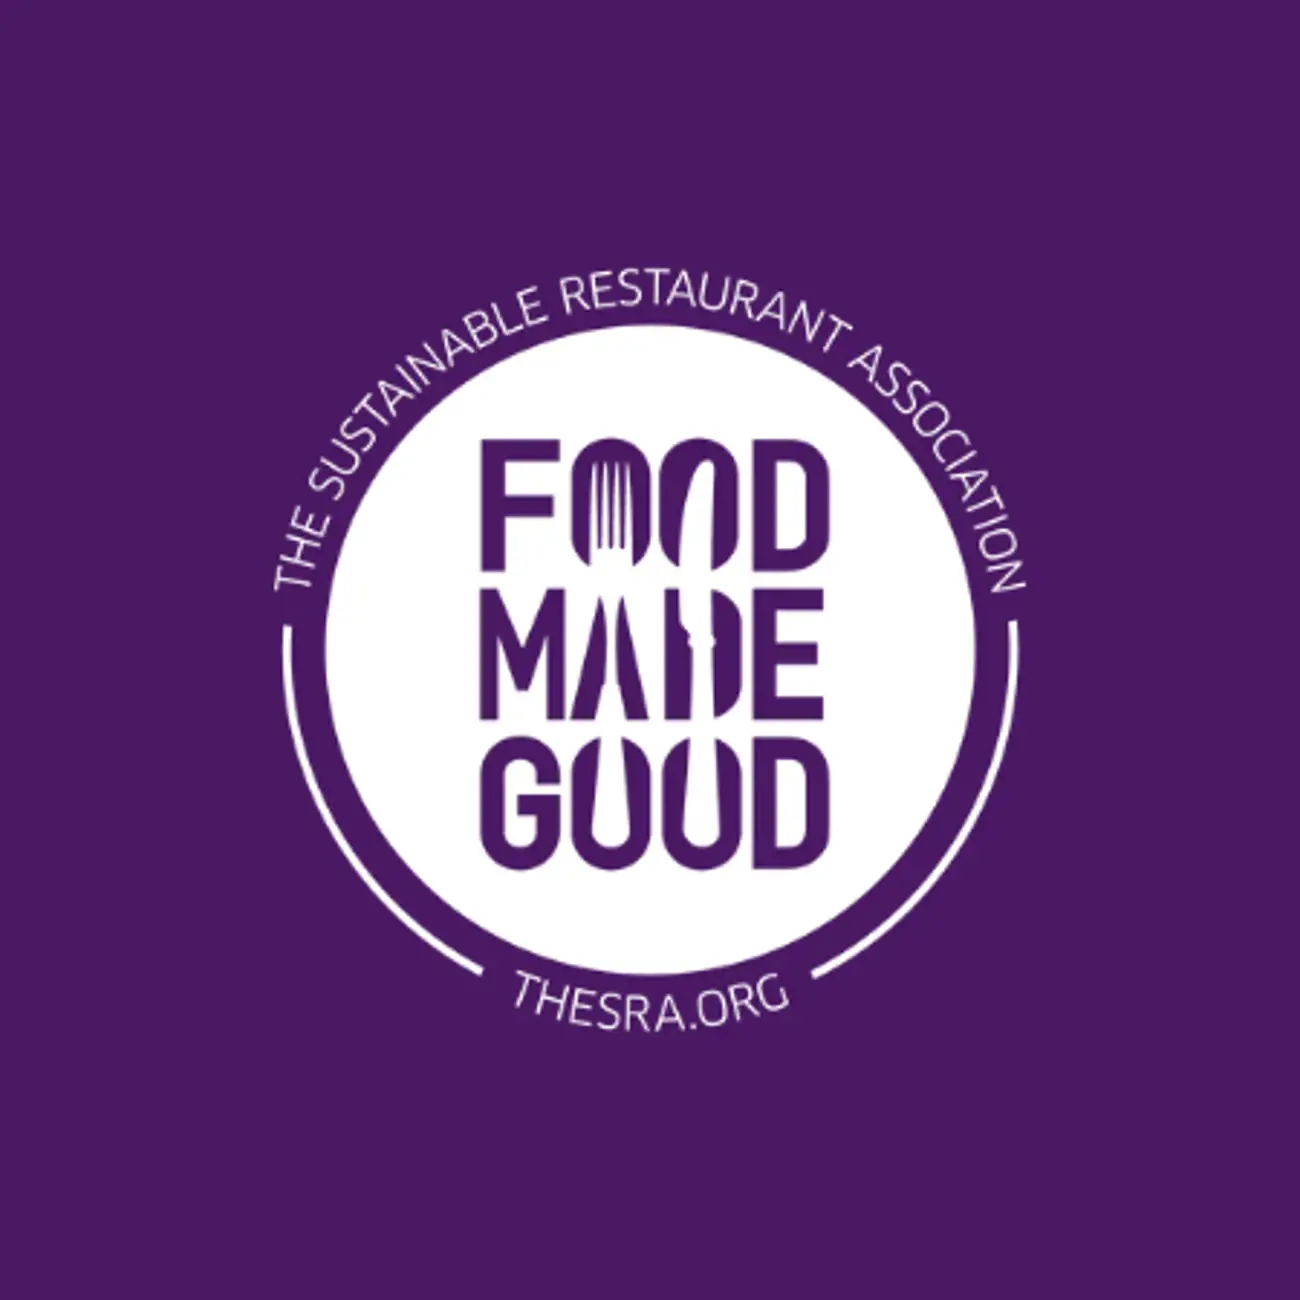 The Food Made Good seal — sustainable restaurant certification